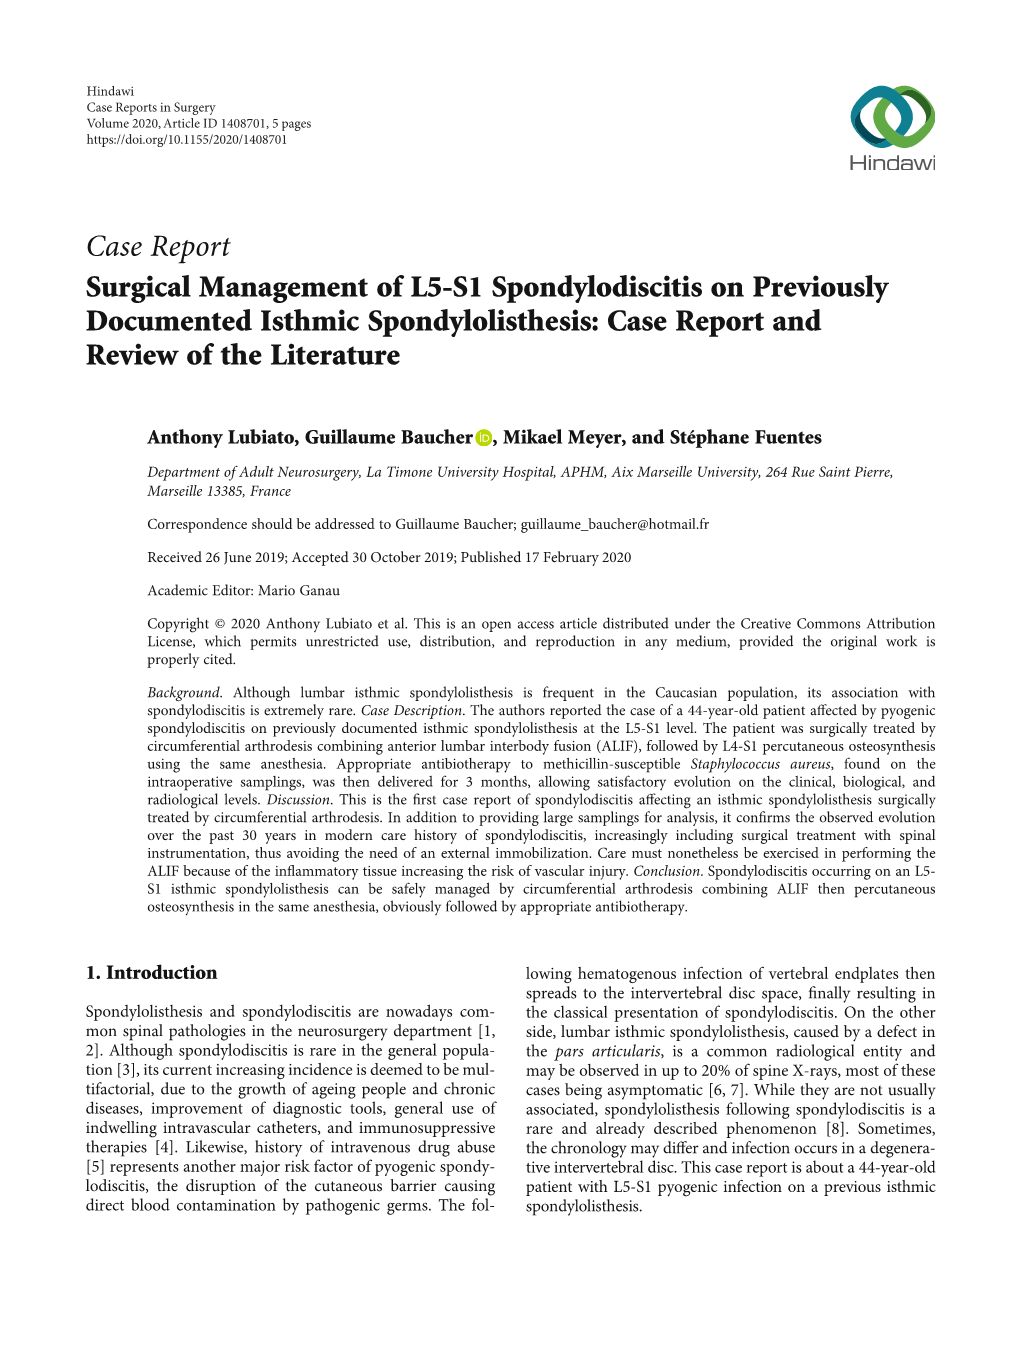 Case Report Surgical Management of L5-S1 Spondylodiscitis on Previously Documented Isthmic Spondylolisthesis: Case Report and Review of the Literature